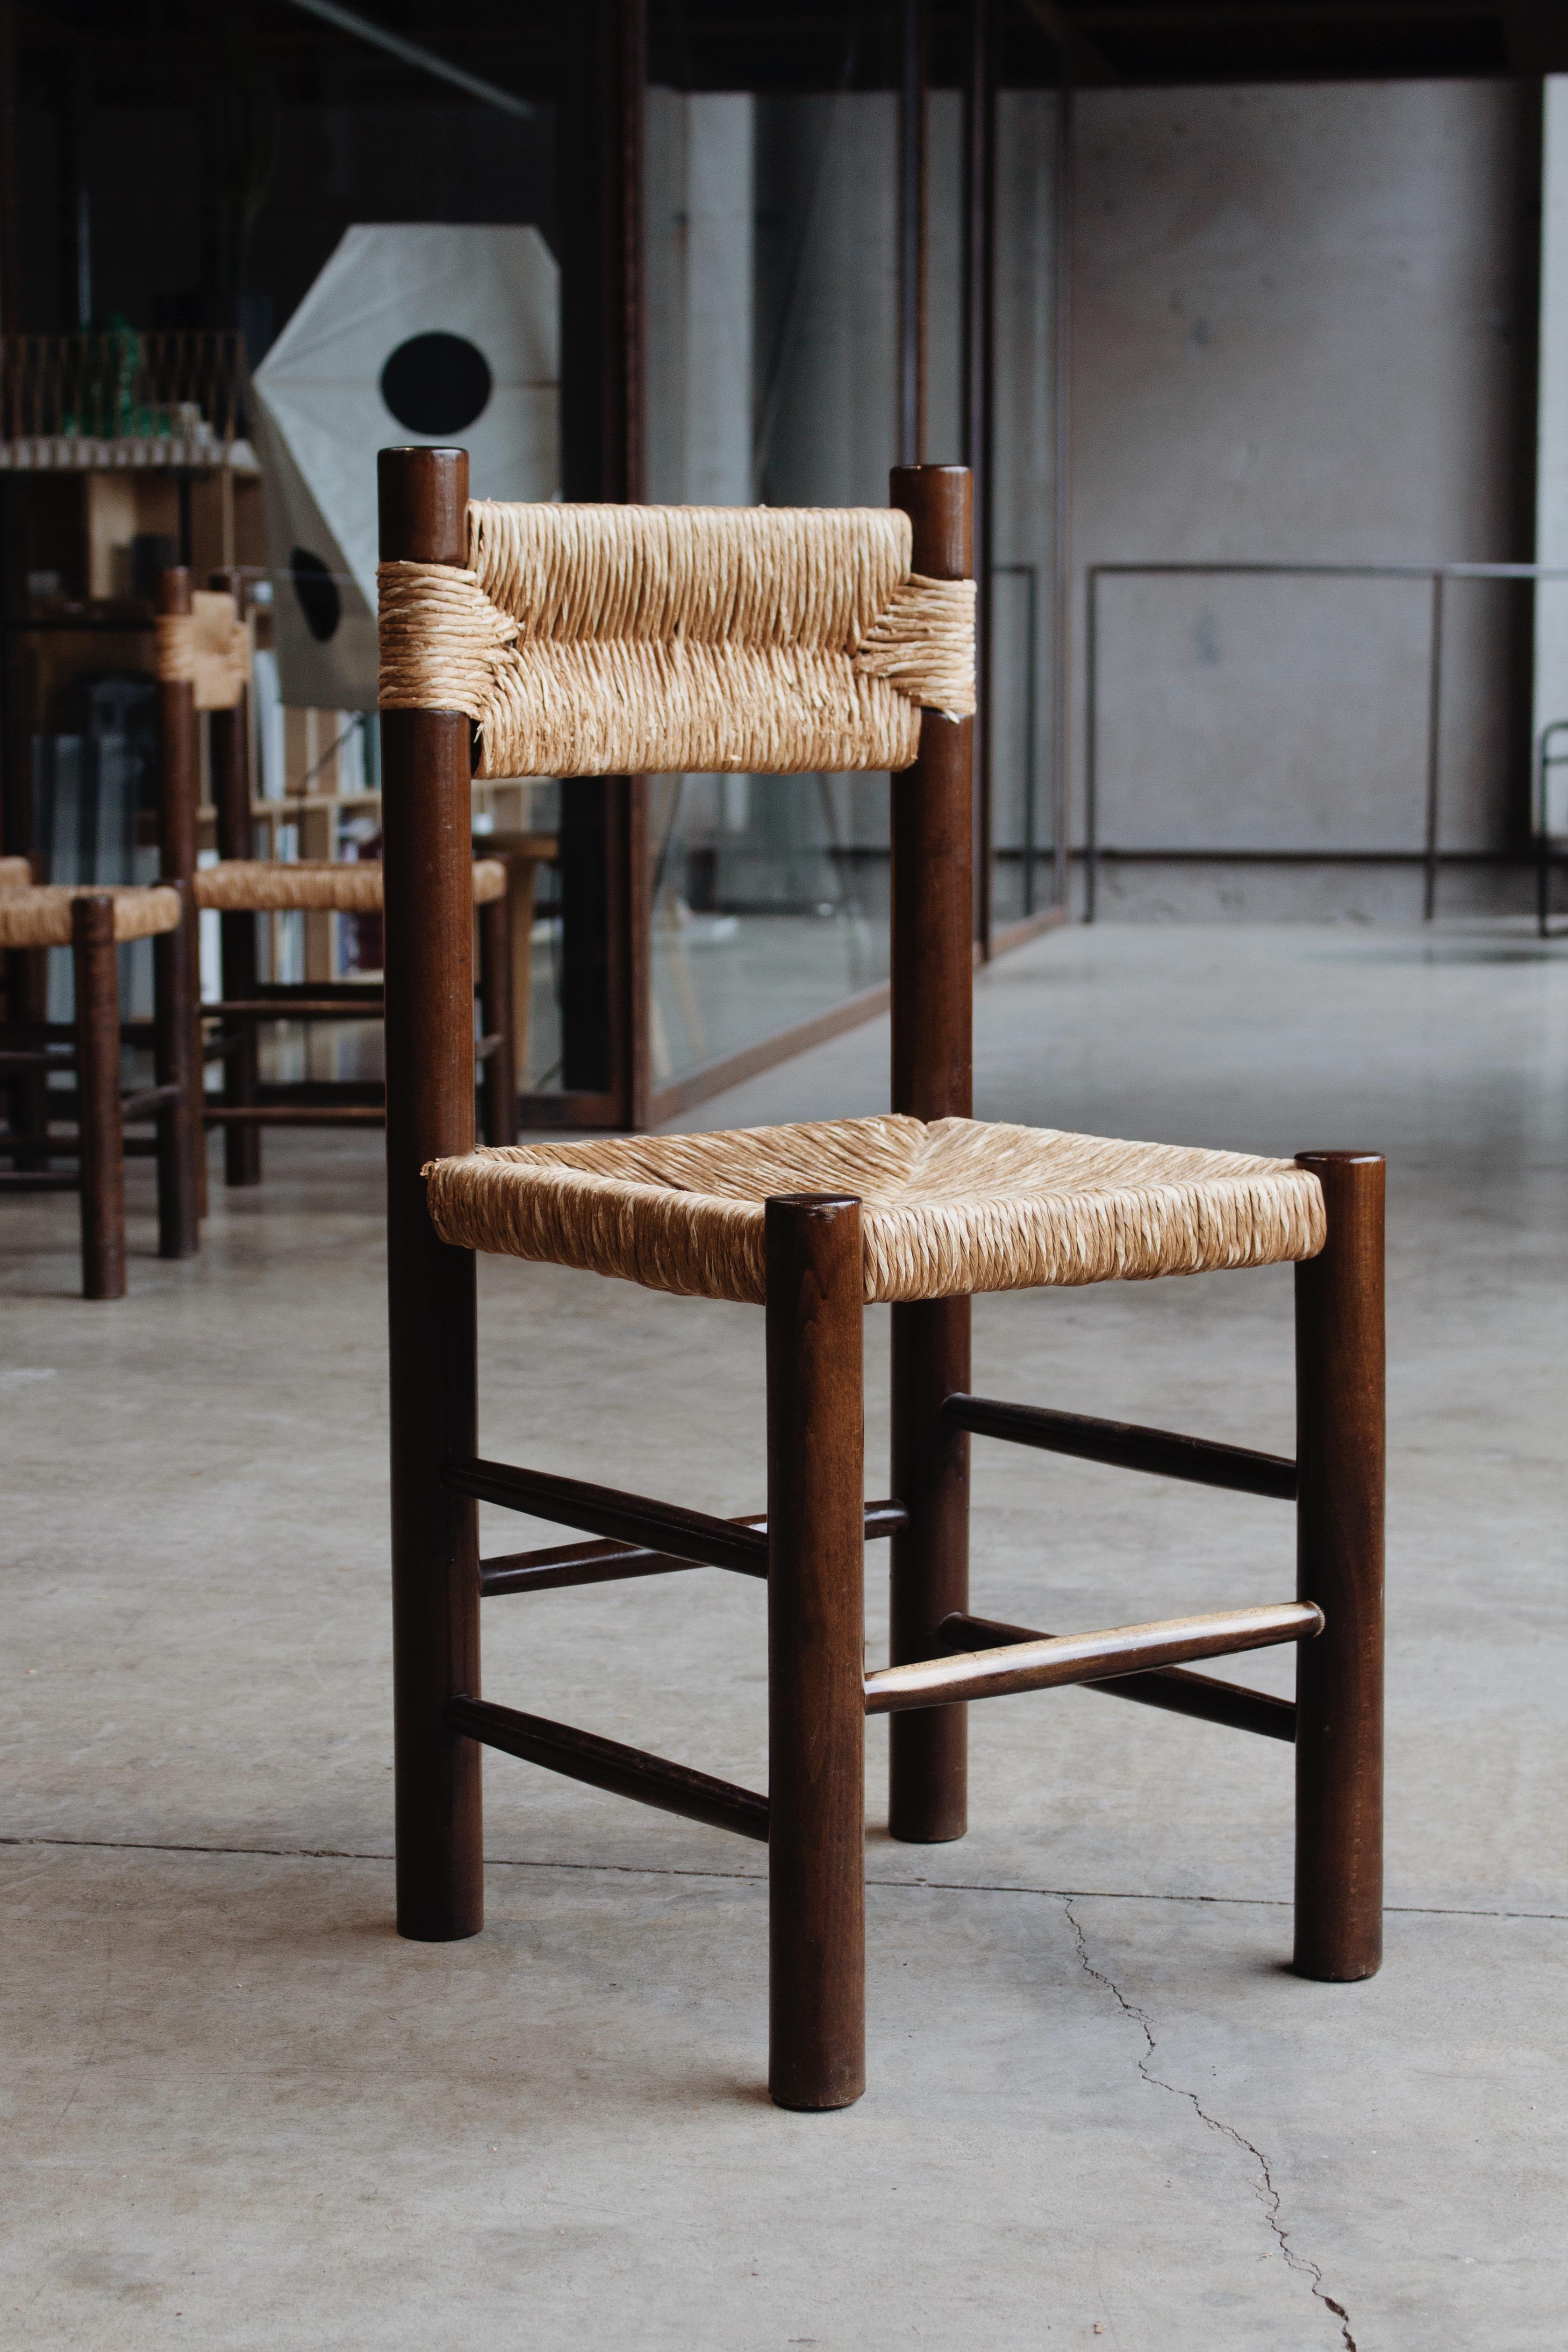 Charlotte Perriand Dining Chairs for Robert Sentou, straw and wood, France, 1964, set of fourteen. 

The chairs have a simple and timeless design. The fancy backrest and seat in straw combined with the pinewood structure form a truly balanced